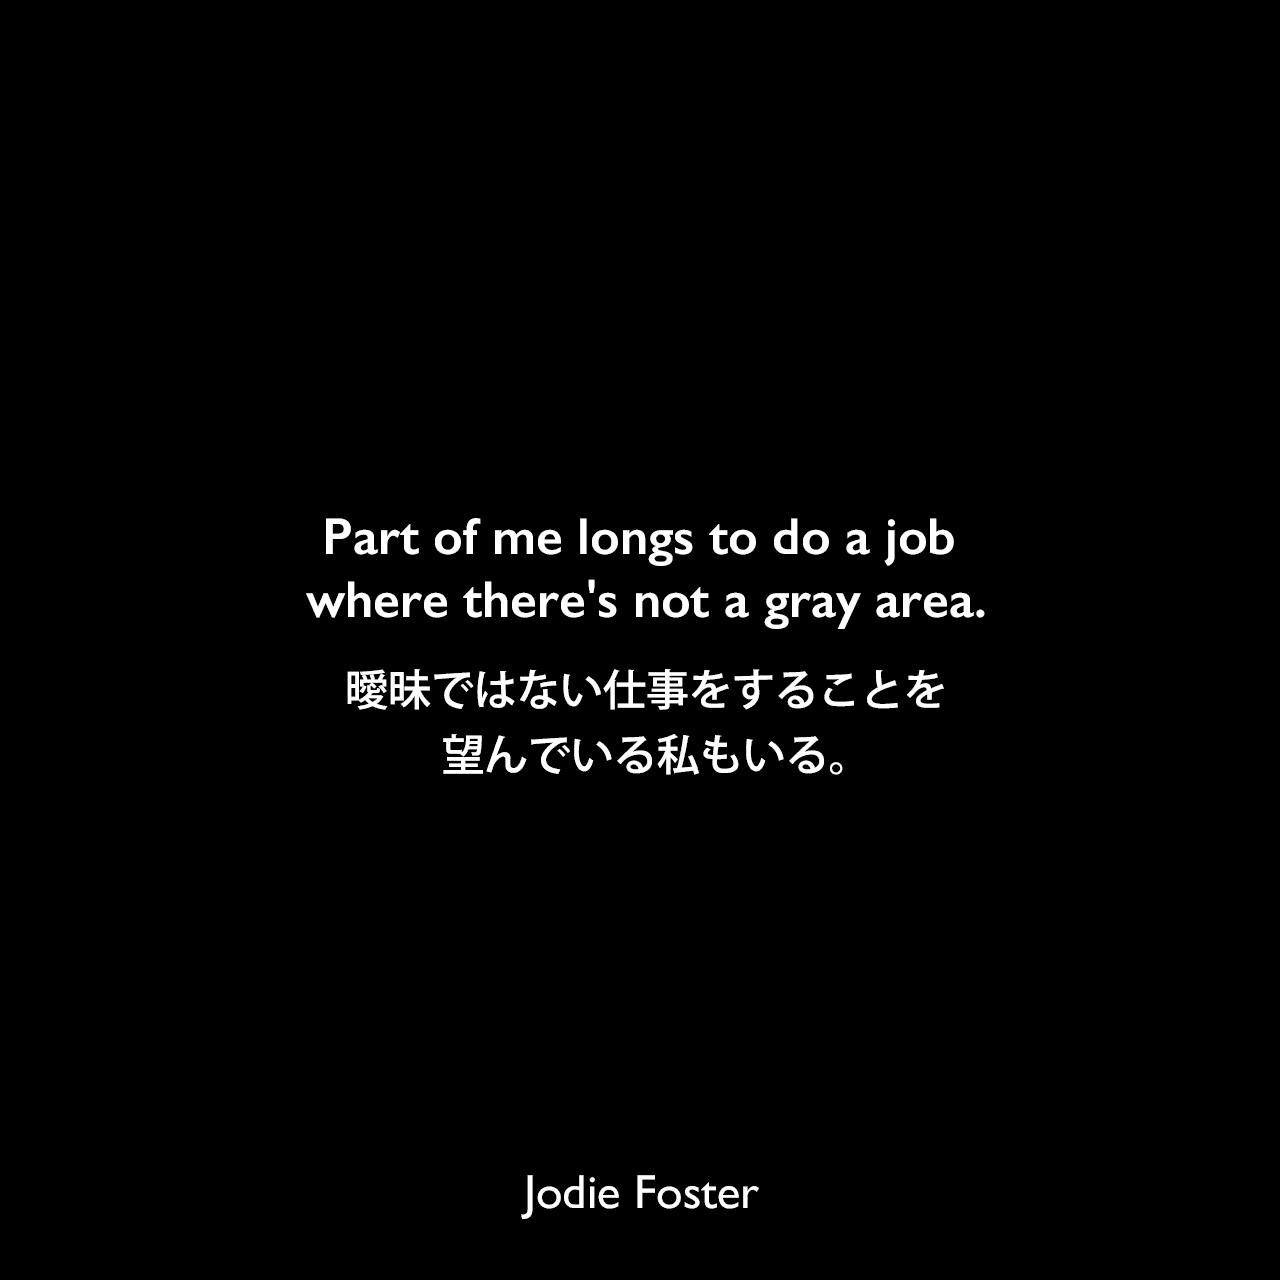 Part of me longs to do a job where there's not a gray area.曖昧ではない仕事をすることを望んでいる私もいる。Jodie Foster